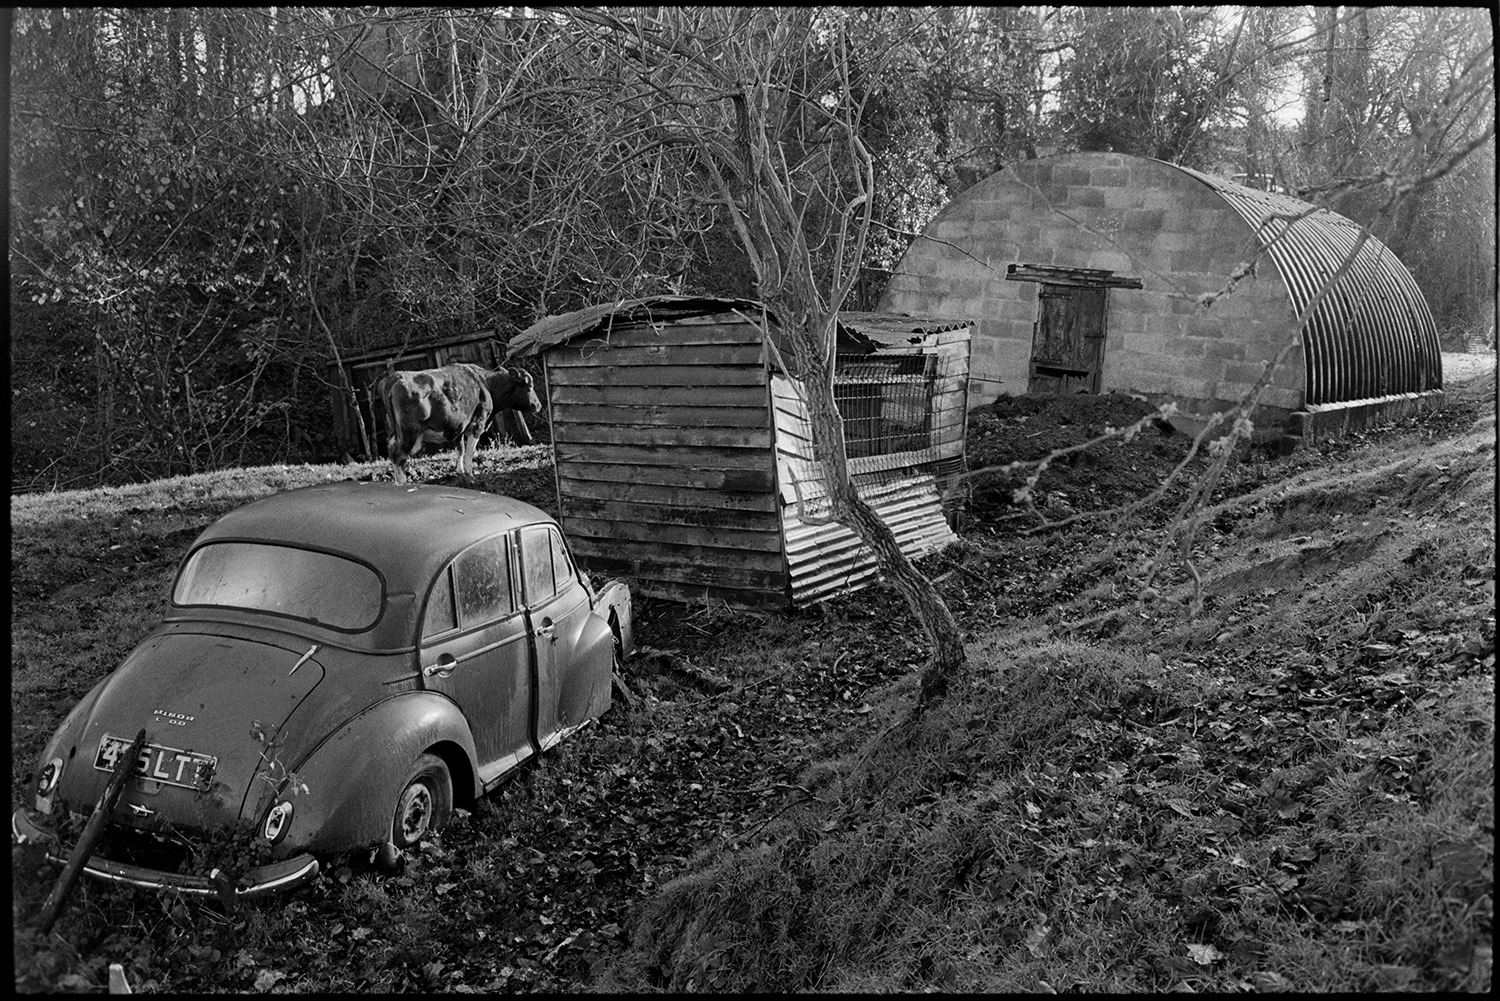 Loading young bull into trailer.
[An old Morris Minor car, used as poultry shed, alongside a wooden shed and nissen hut in a field at Millhams, Dolton. A cow is standing behind the shed with woodland in the background.]